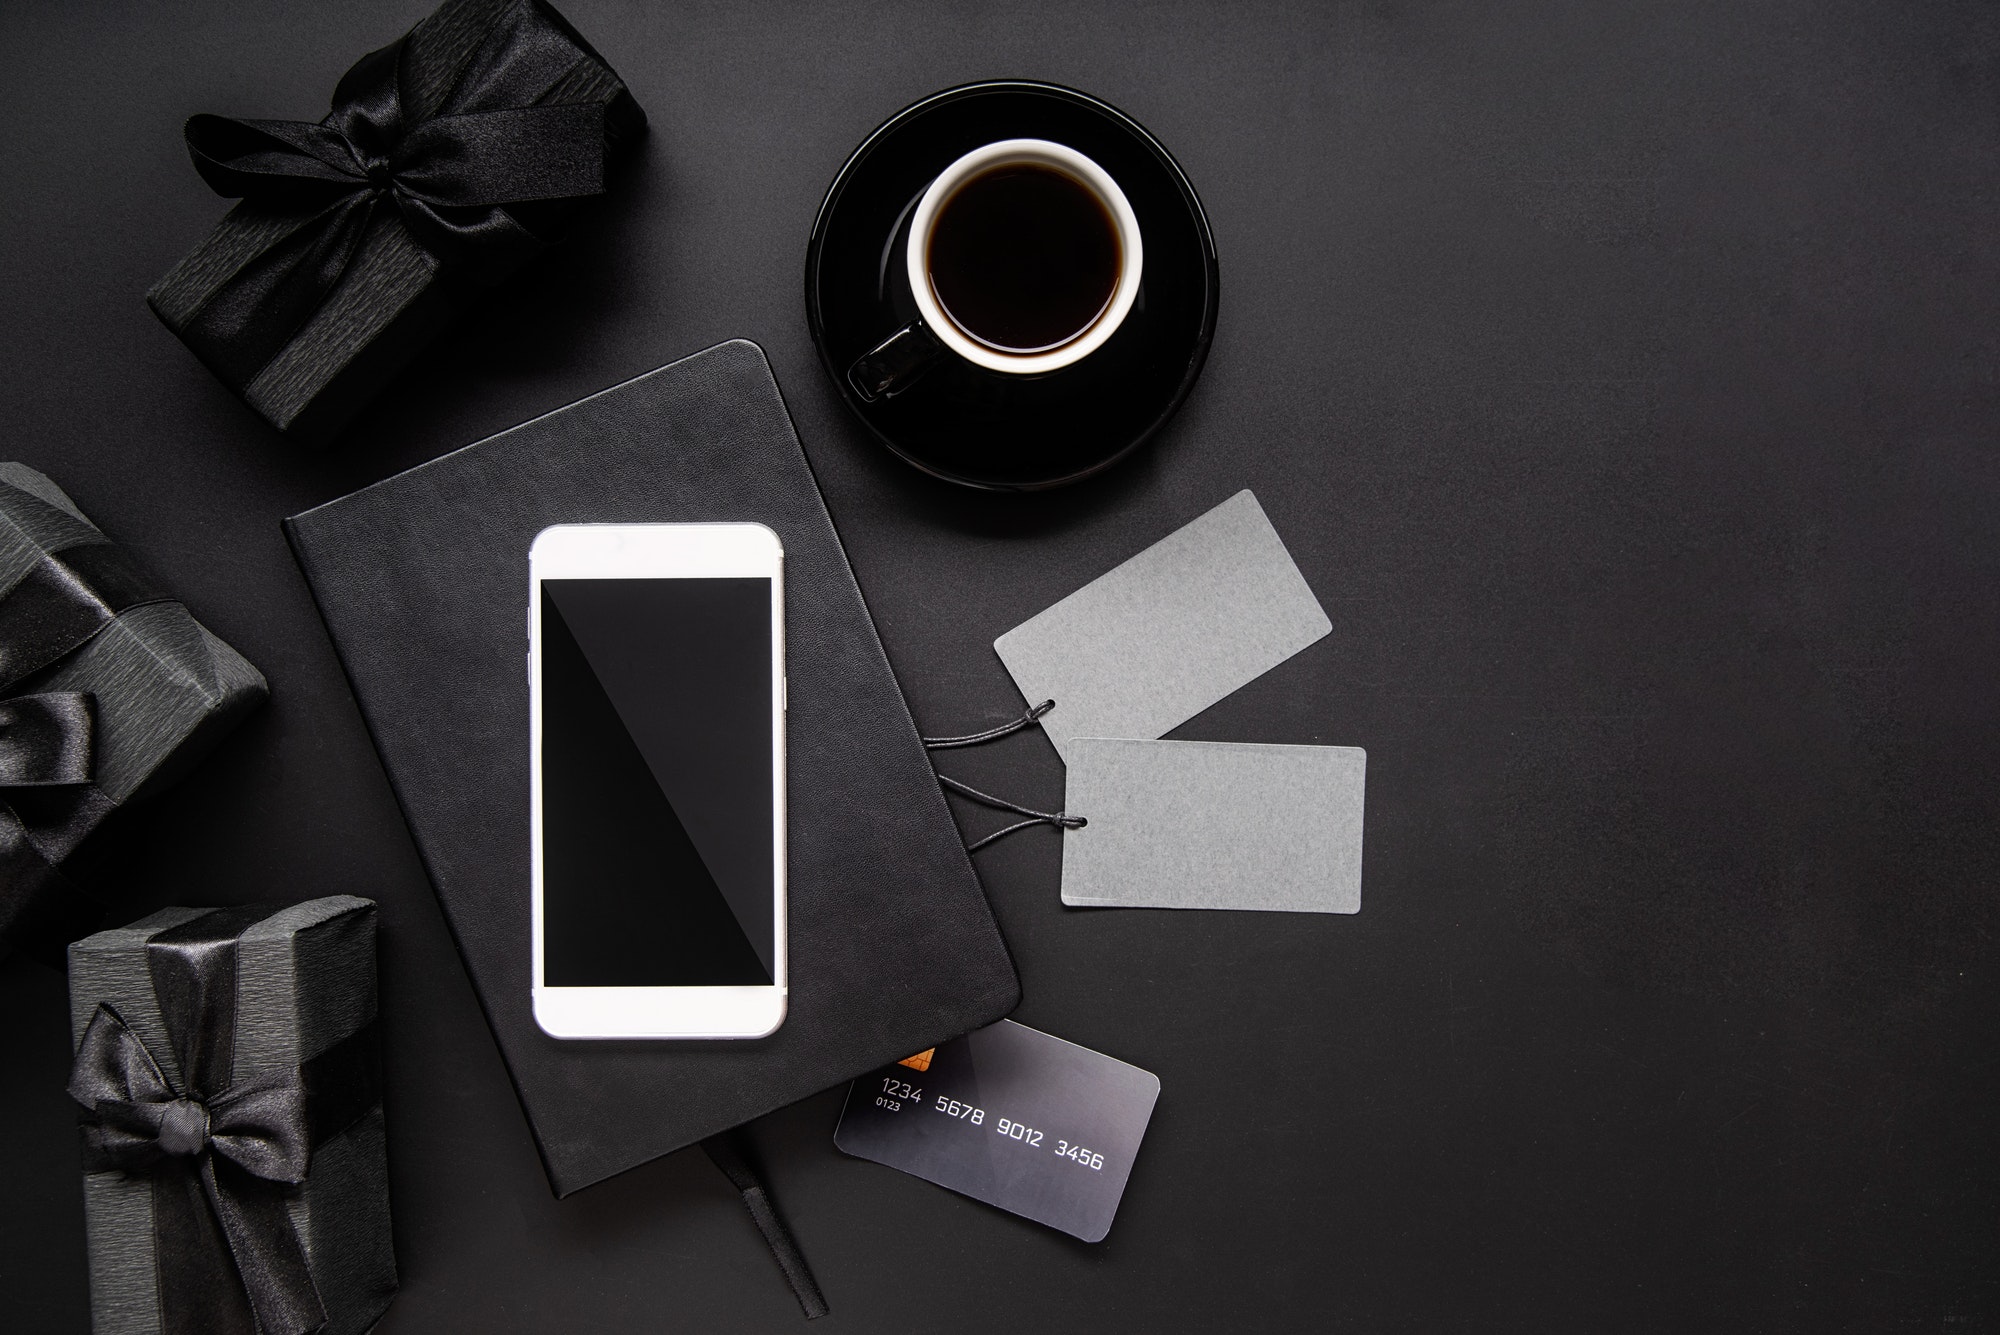 black-smartphone-price-tags-coffee-and-gifts-top-view-on-black-background.jpg